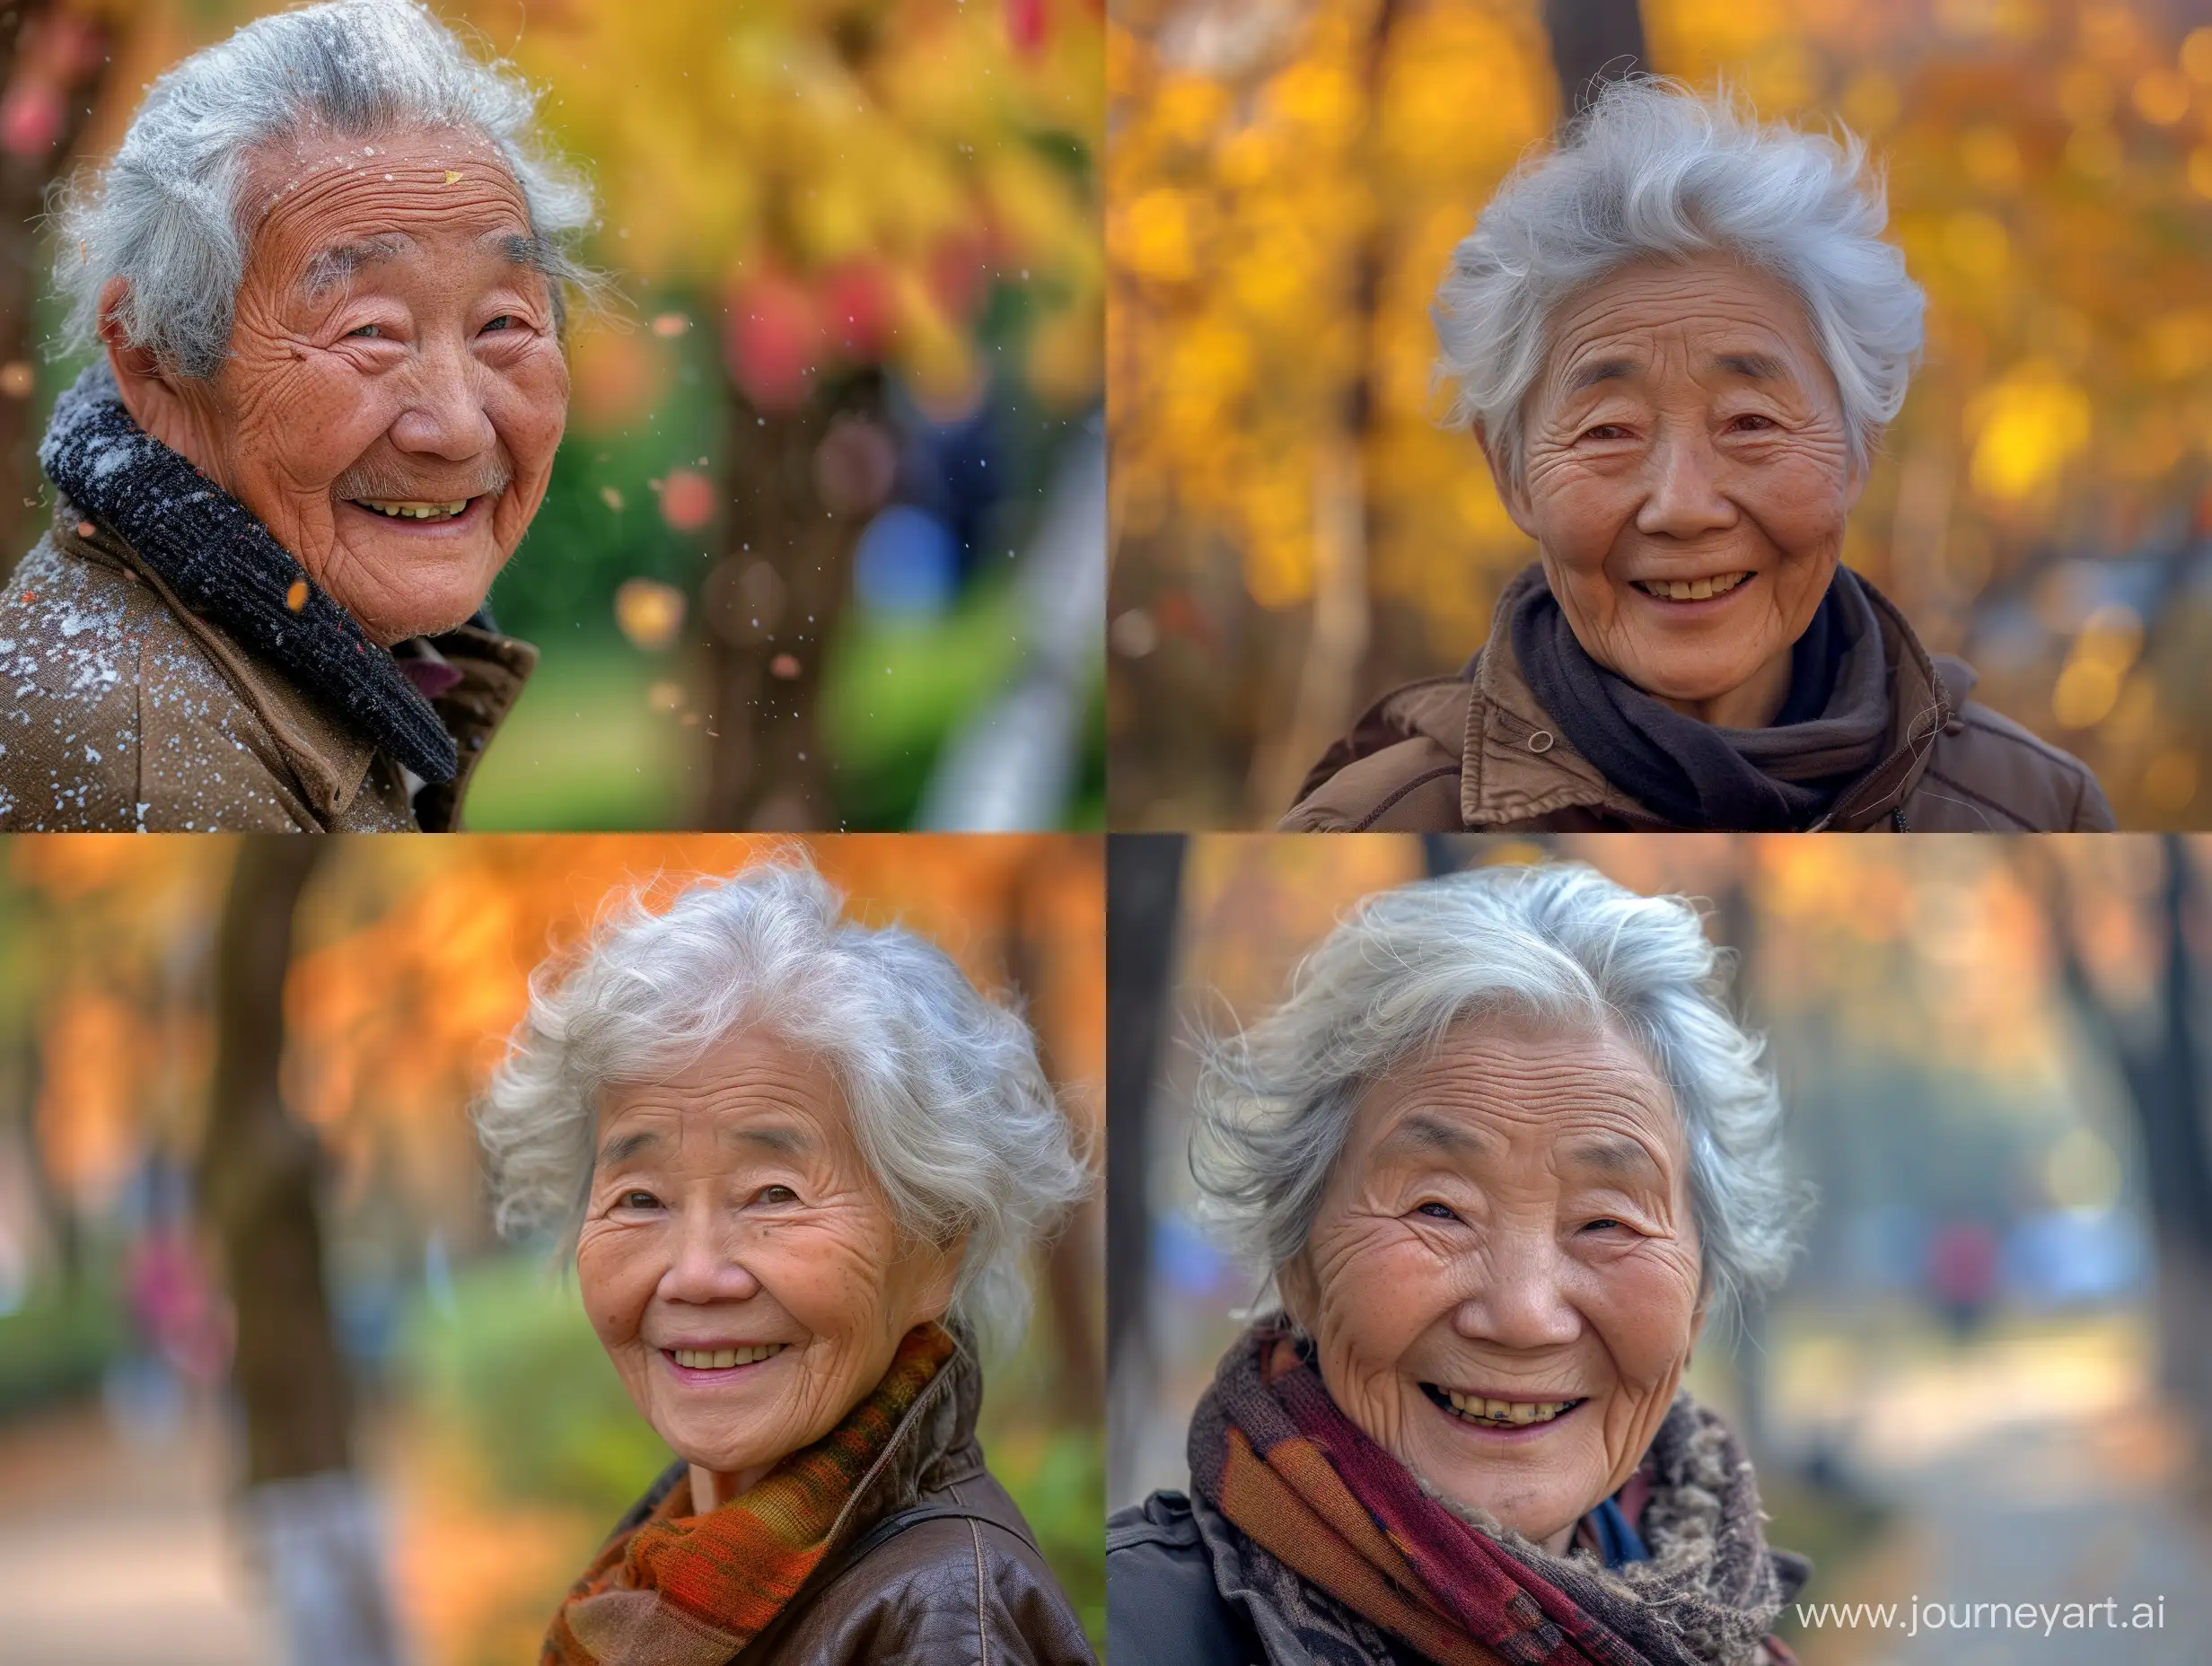 An 80-year-old Chinese person with a happy smile and snowy white hair, enjoying a leisurely autumn walk in a park. The scene is beautifully captured with a blurred background, enhancing the realism and adding depth to the image. 8k HDR best quality.

